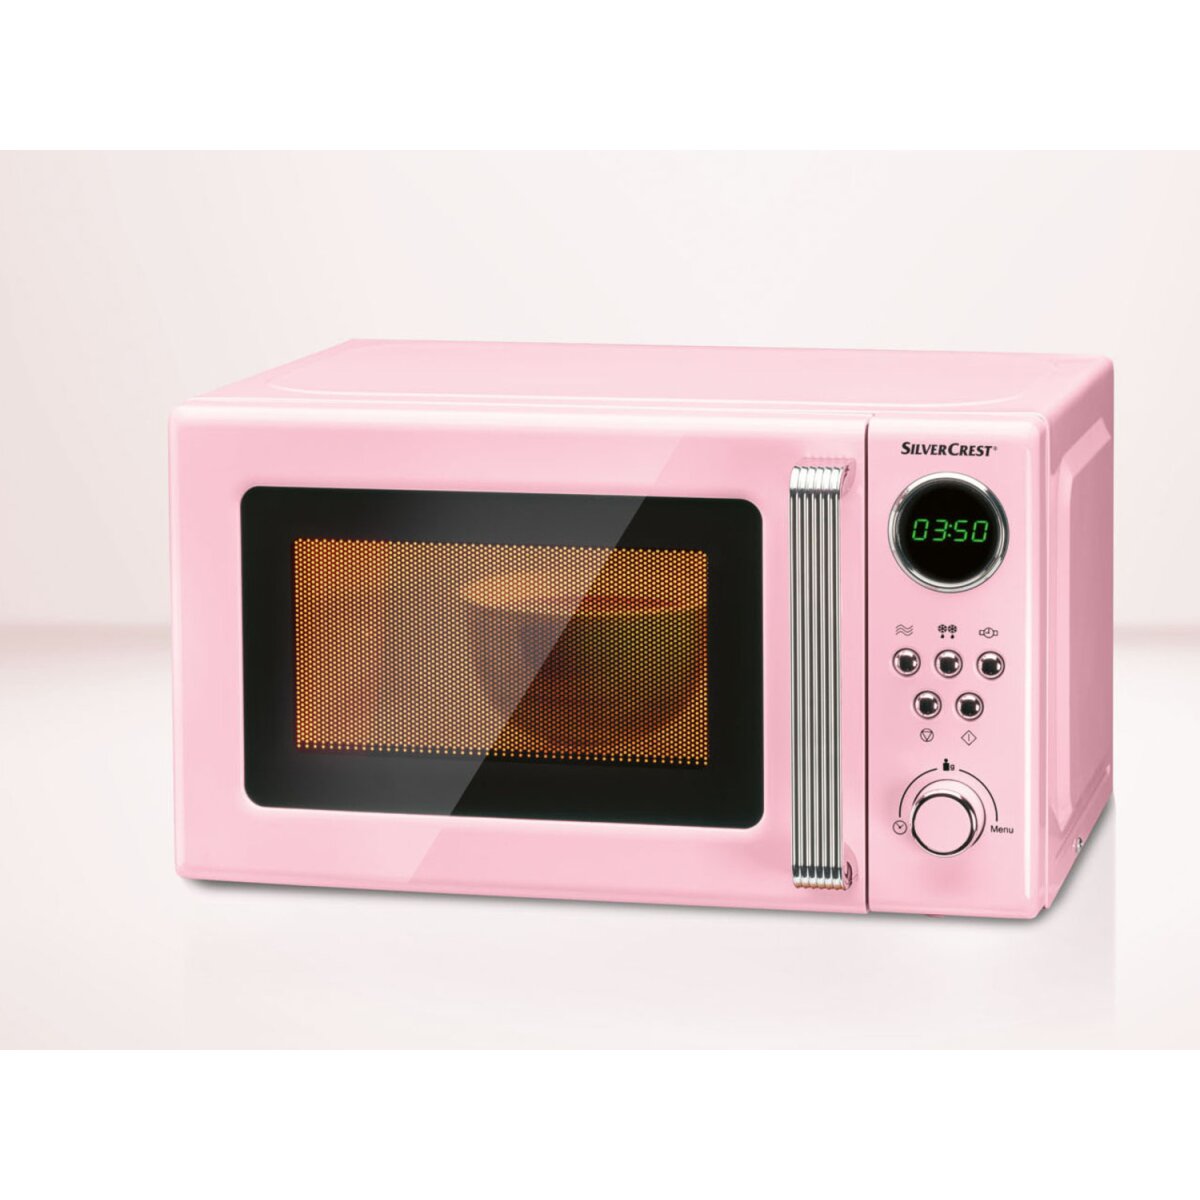 »SMWC SILVERCREST® 700 17l, € Mikrowelle KITCHEN 700 rosa C1«, sehr W - TOOLS 63,99 gut, B-Ware